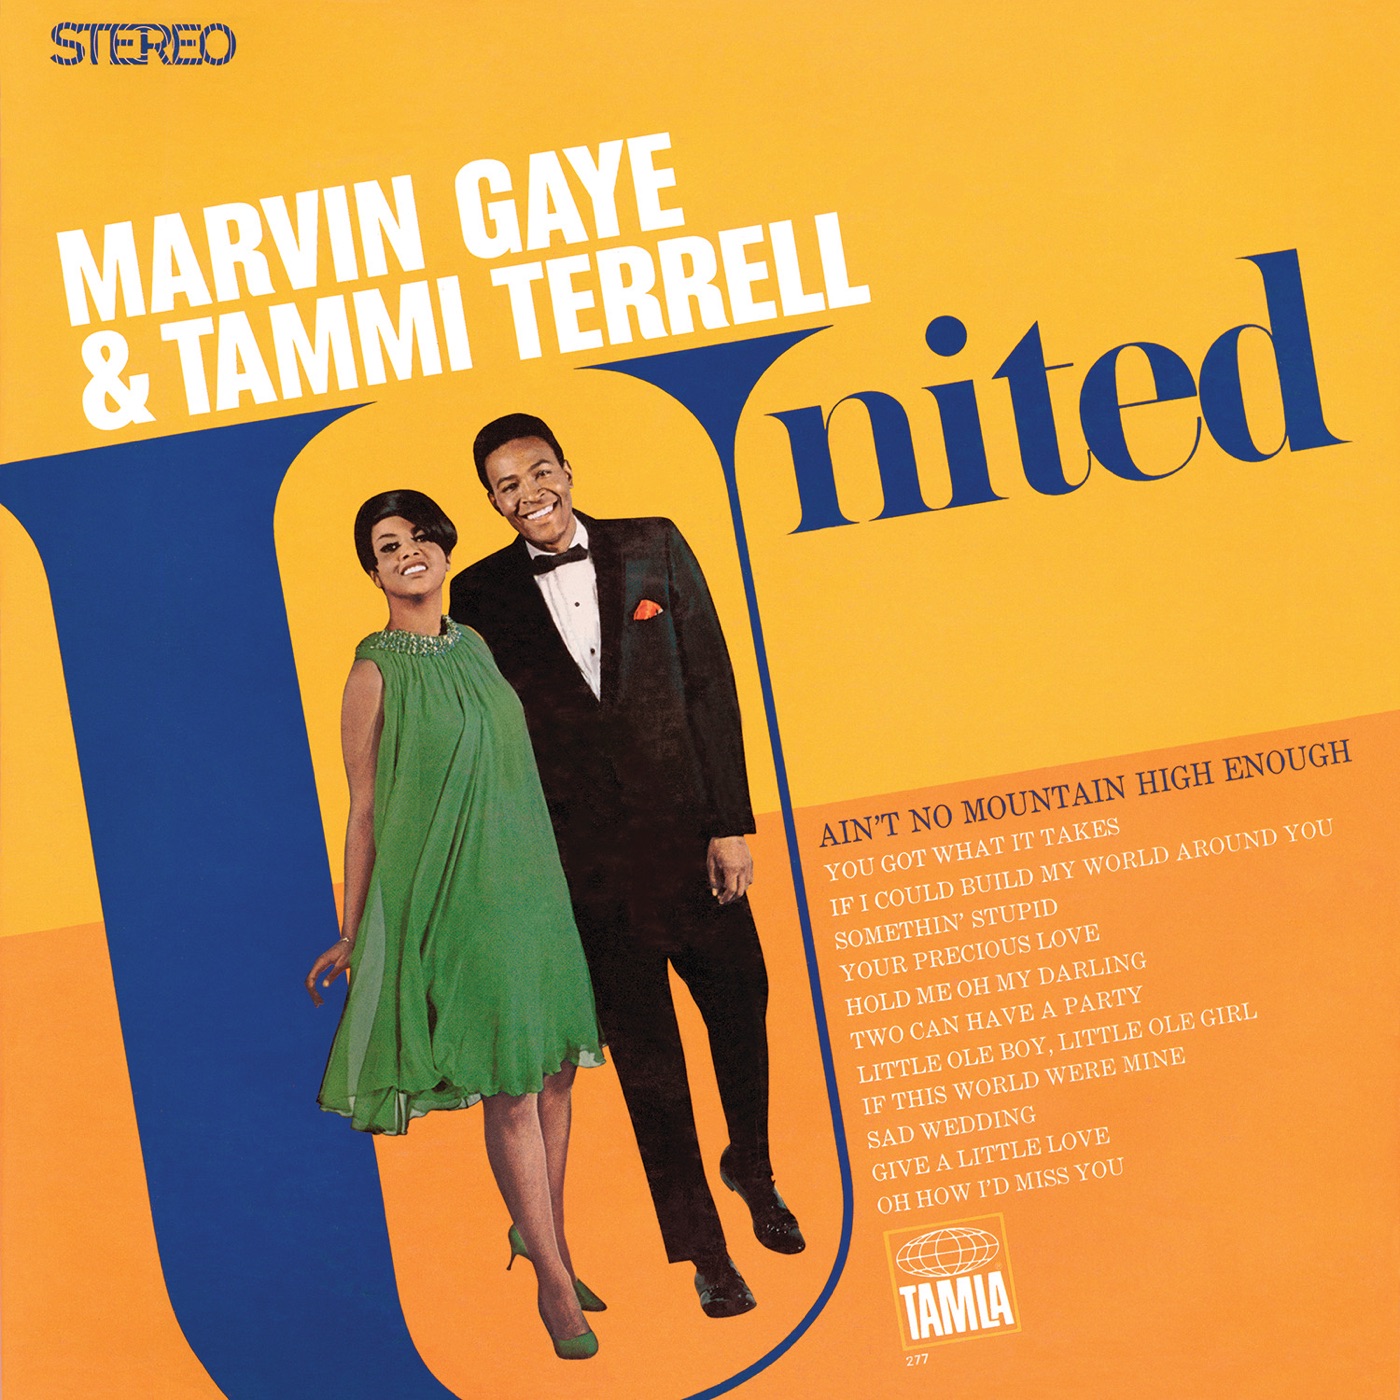 United by Marvin Gaye, Tammi Terrell